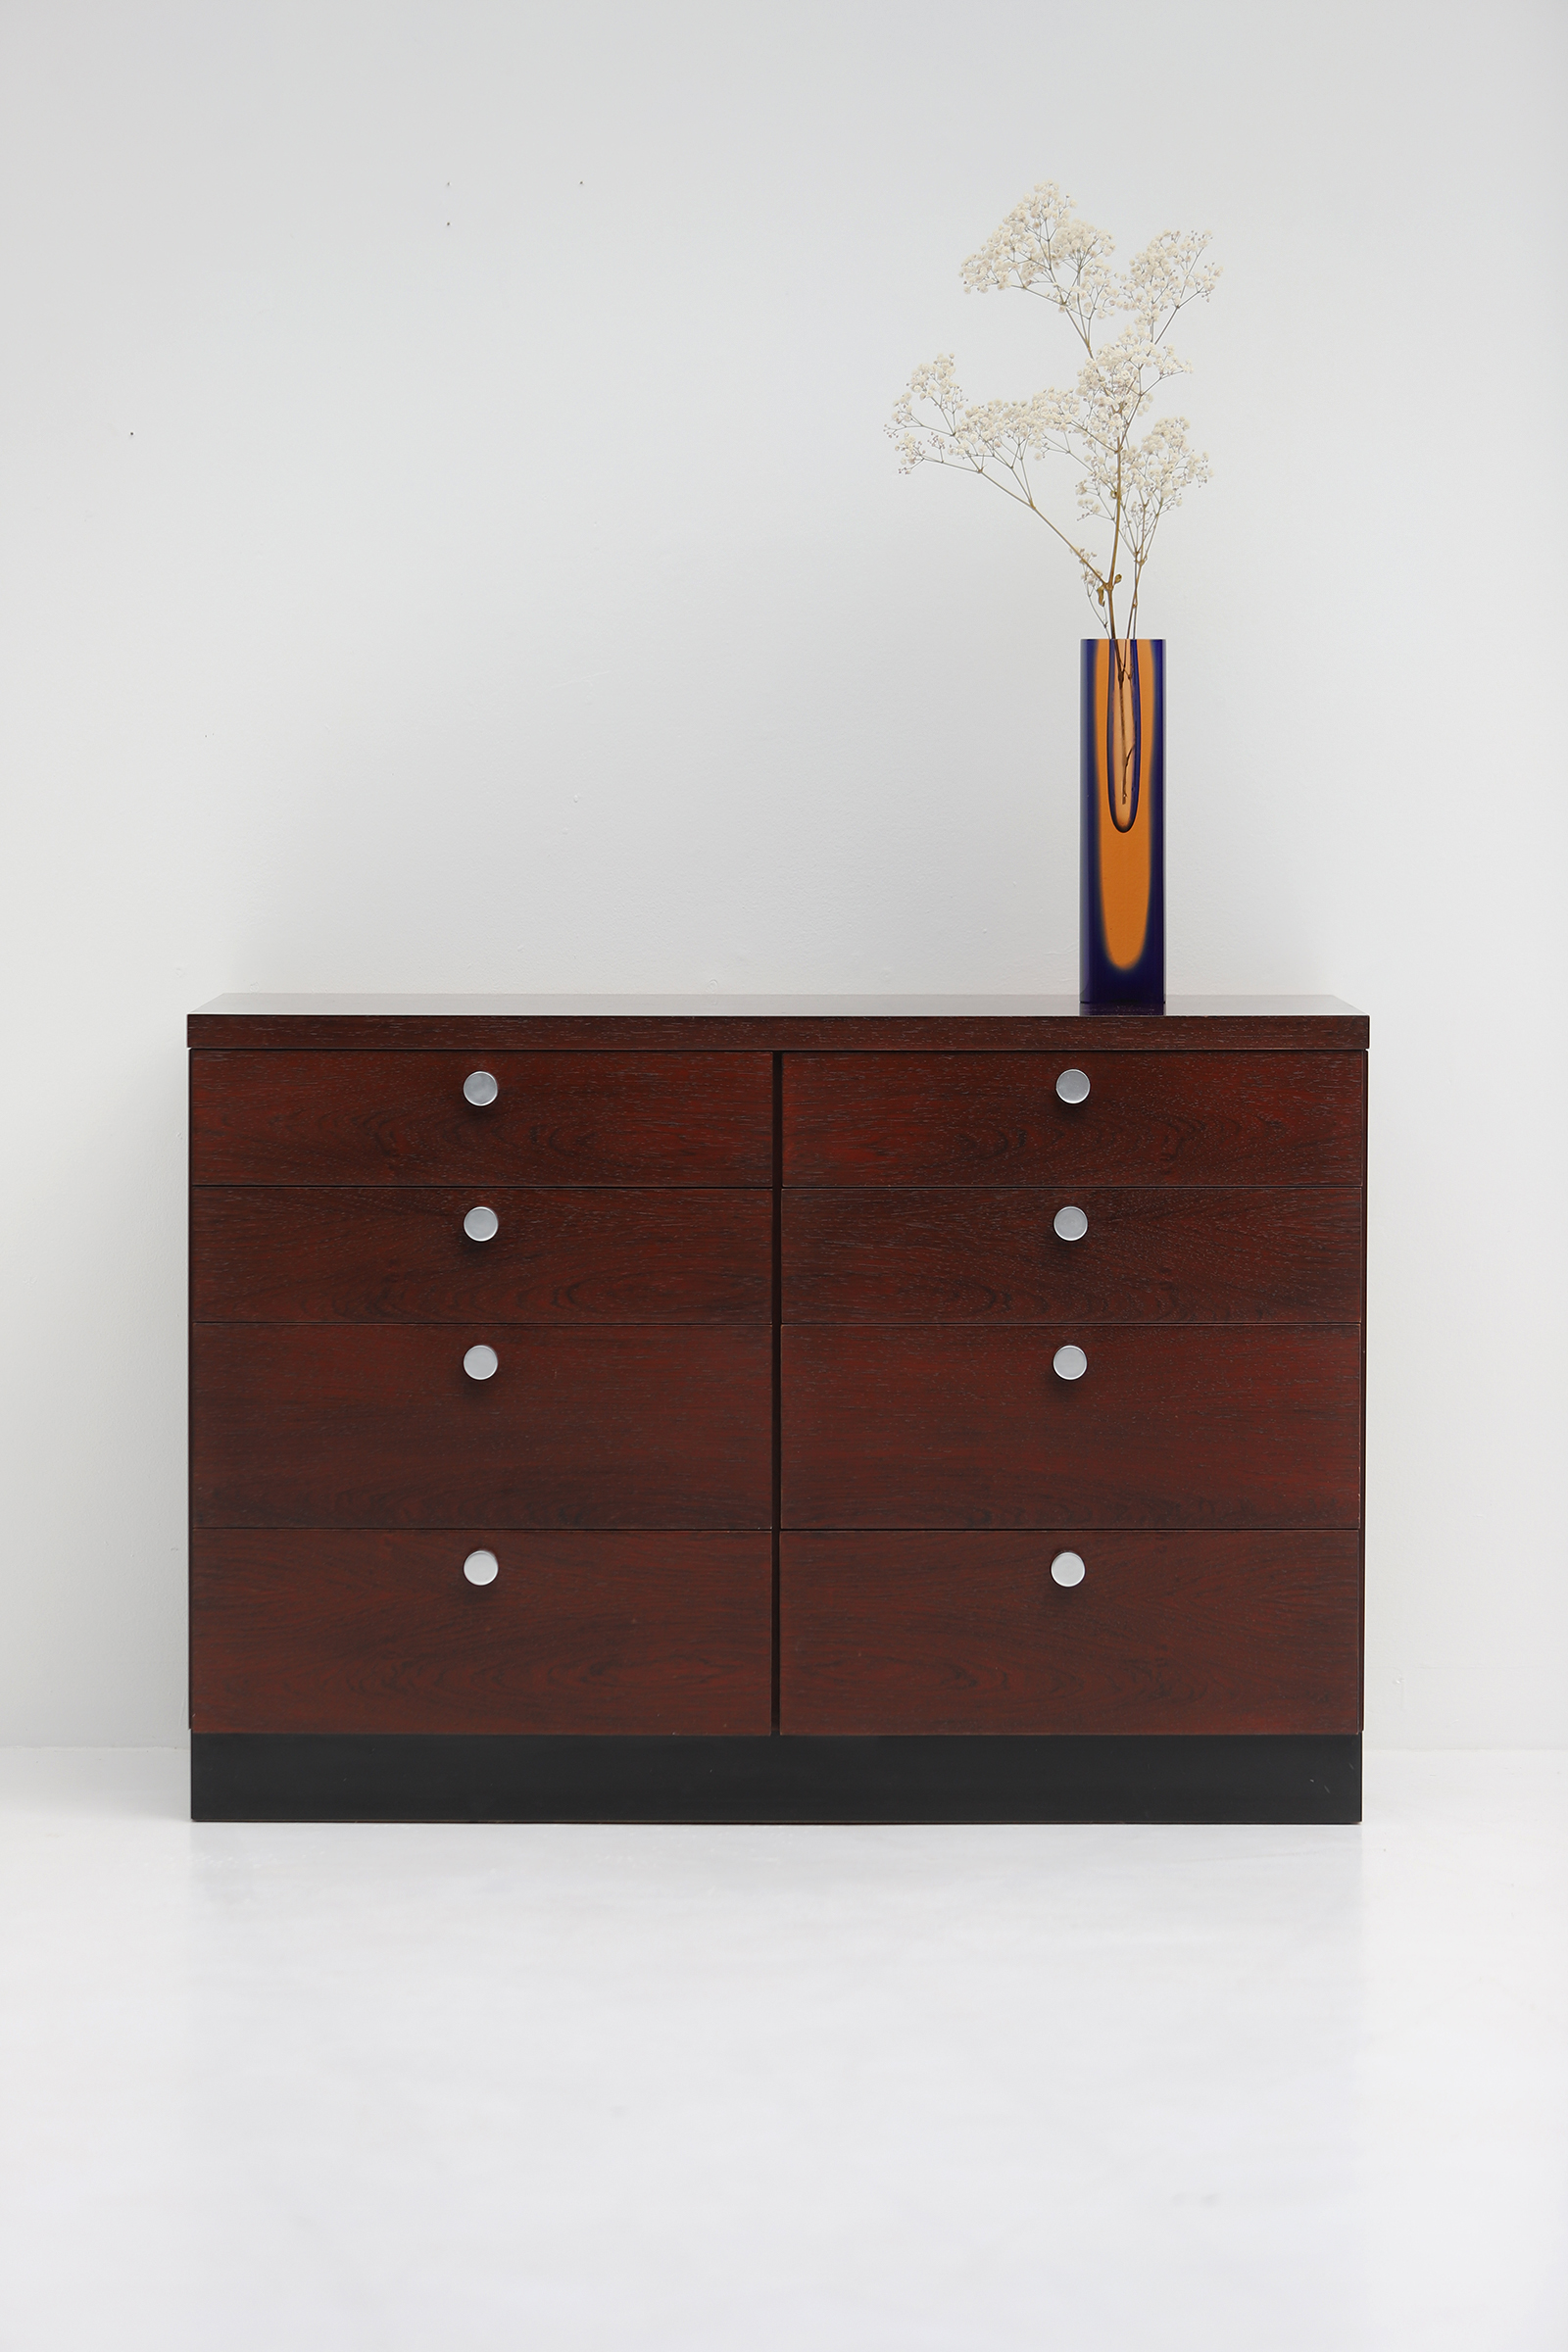 Decorative Alfred Hendrickx commode with drawers 1970simage 1